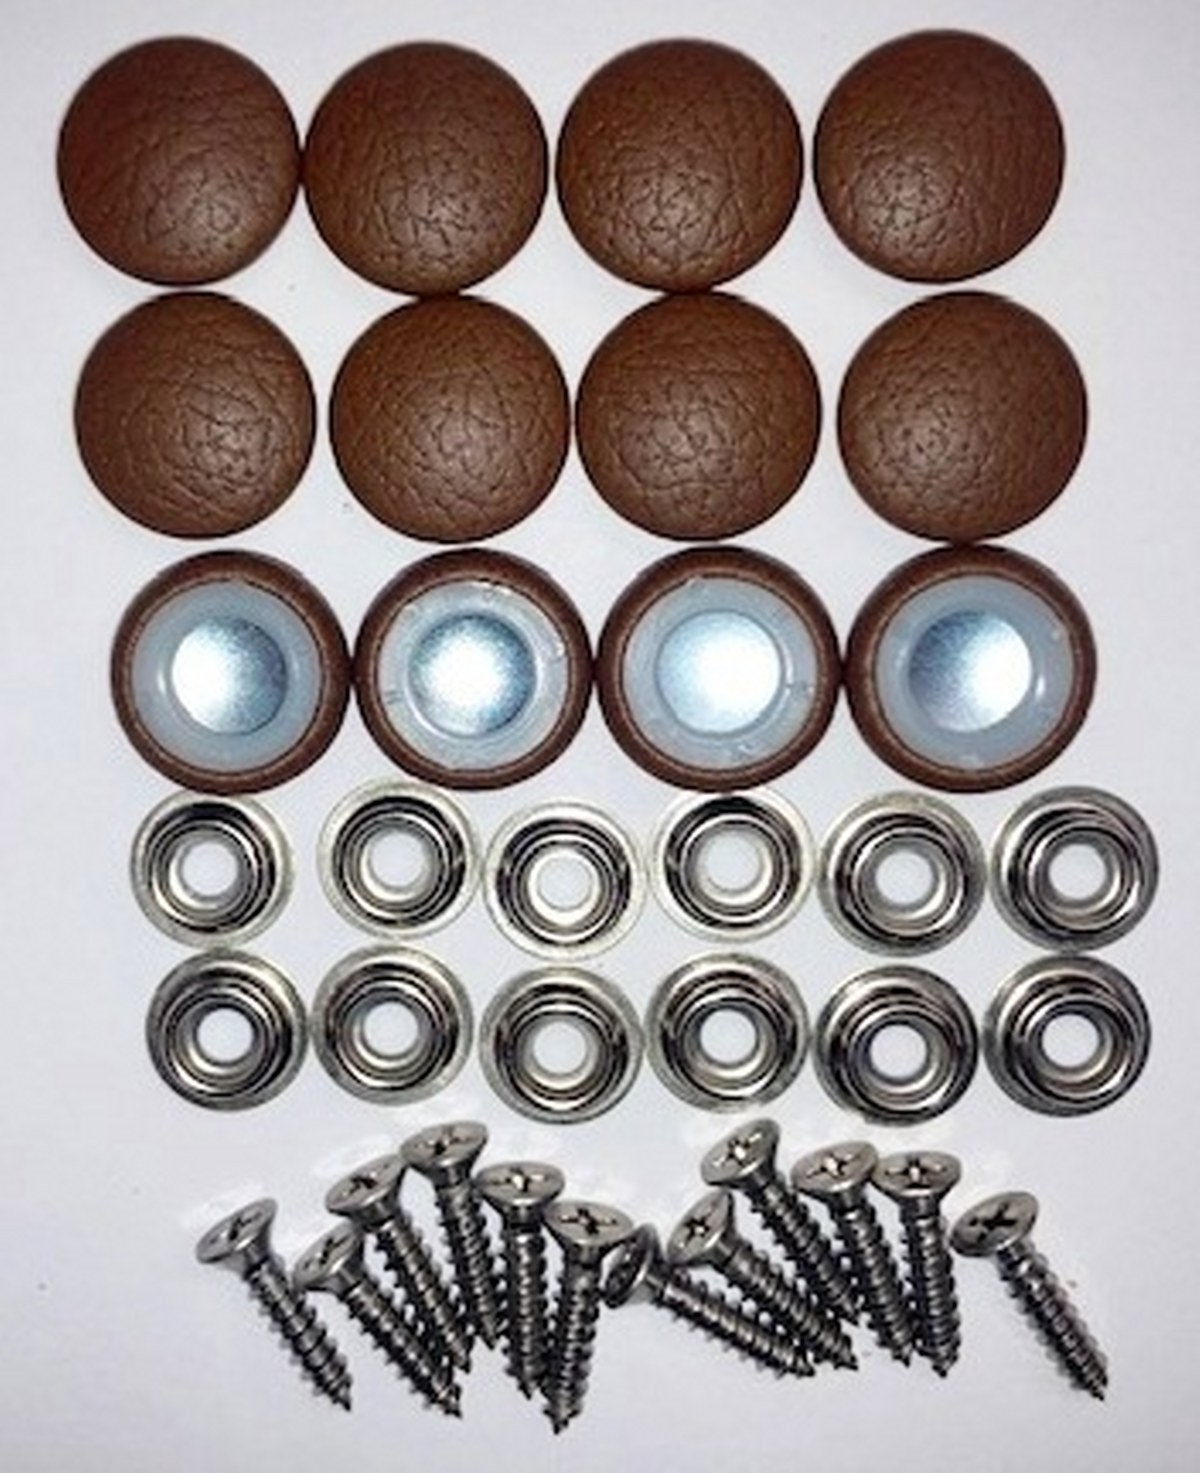 New Set Of 12 #30 Dura Snap Upholstery Buttons RV Boat Brown Ultraleather